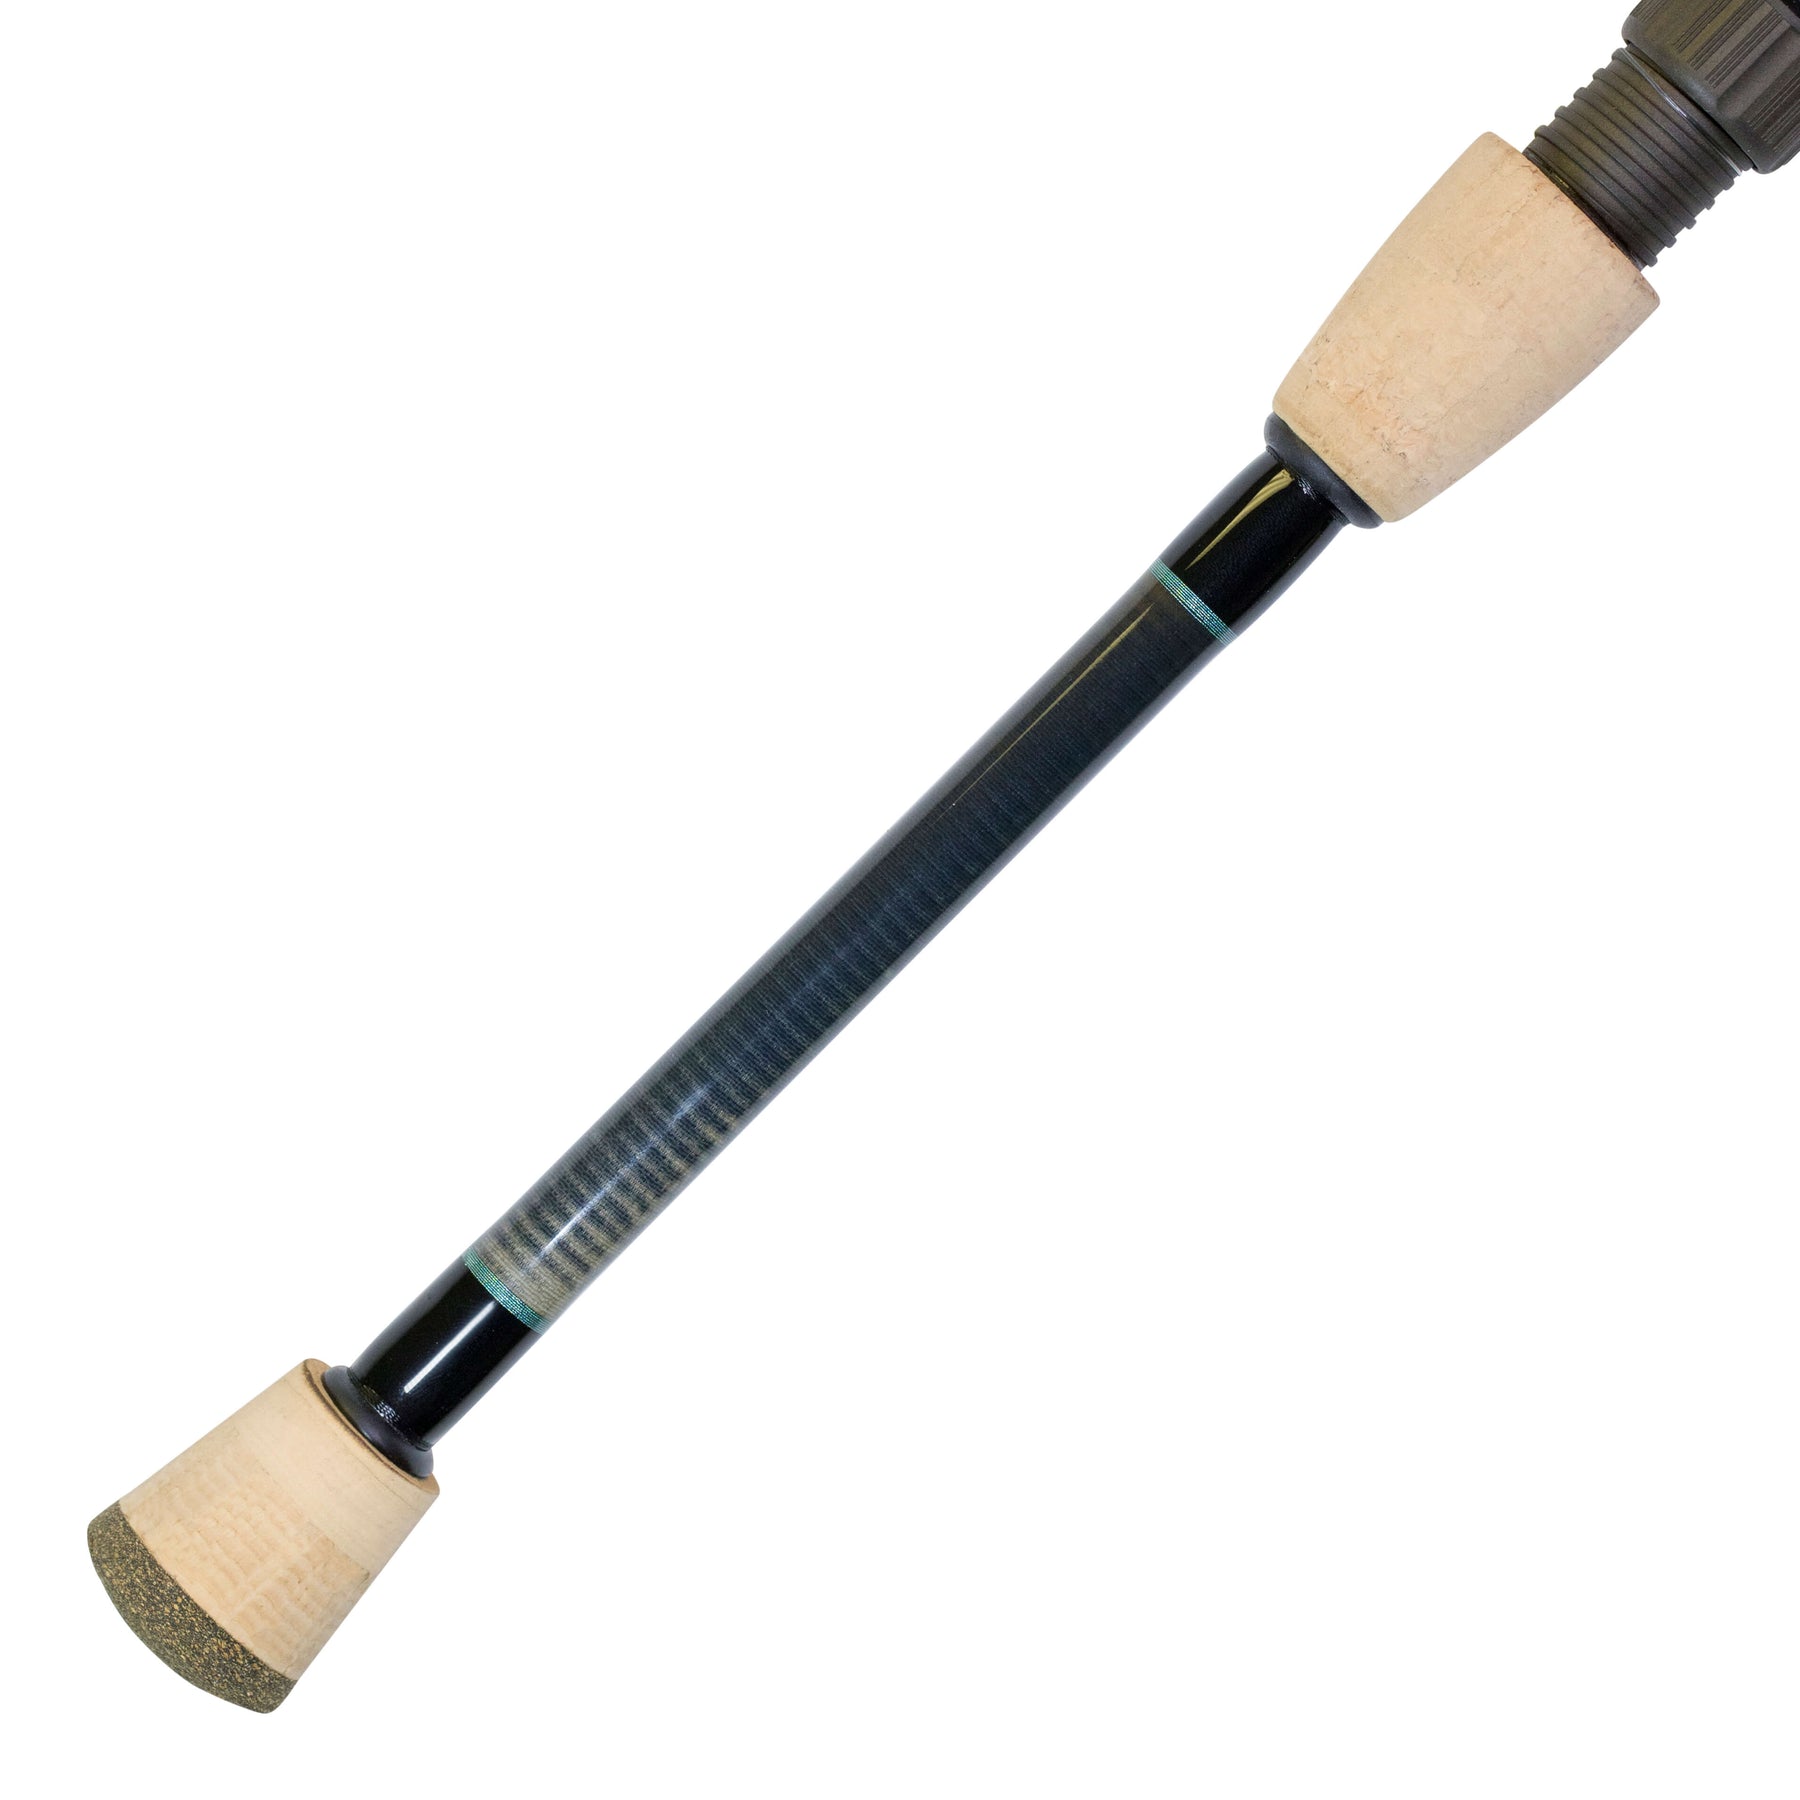 BlacktipH Split-Grip 6-12lb Spinning Rod with Graphite Reel Seat